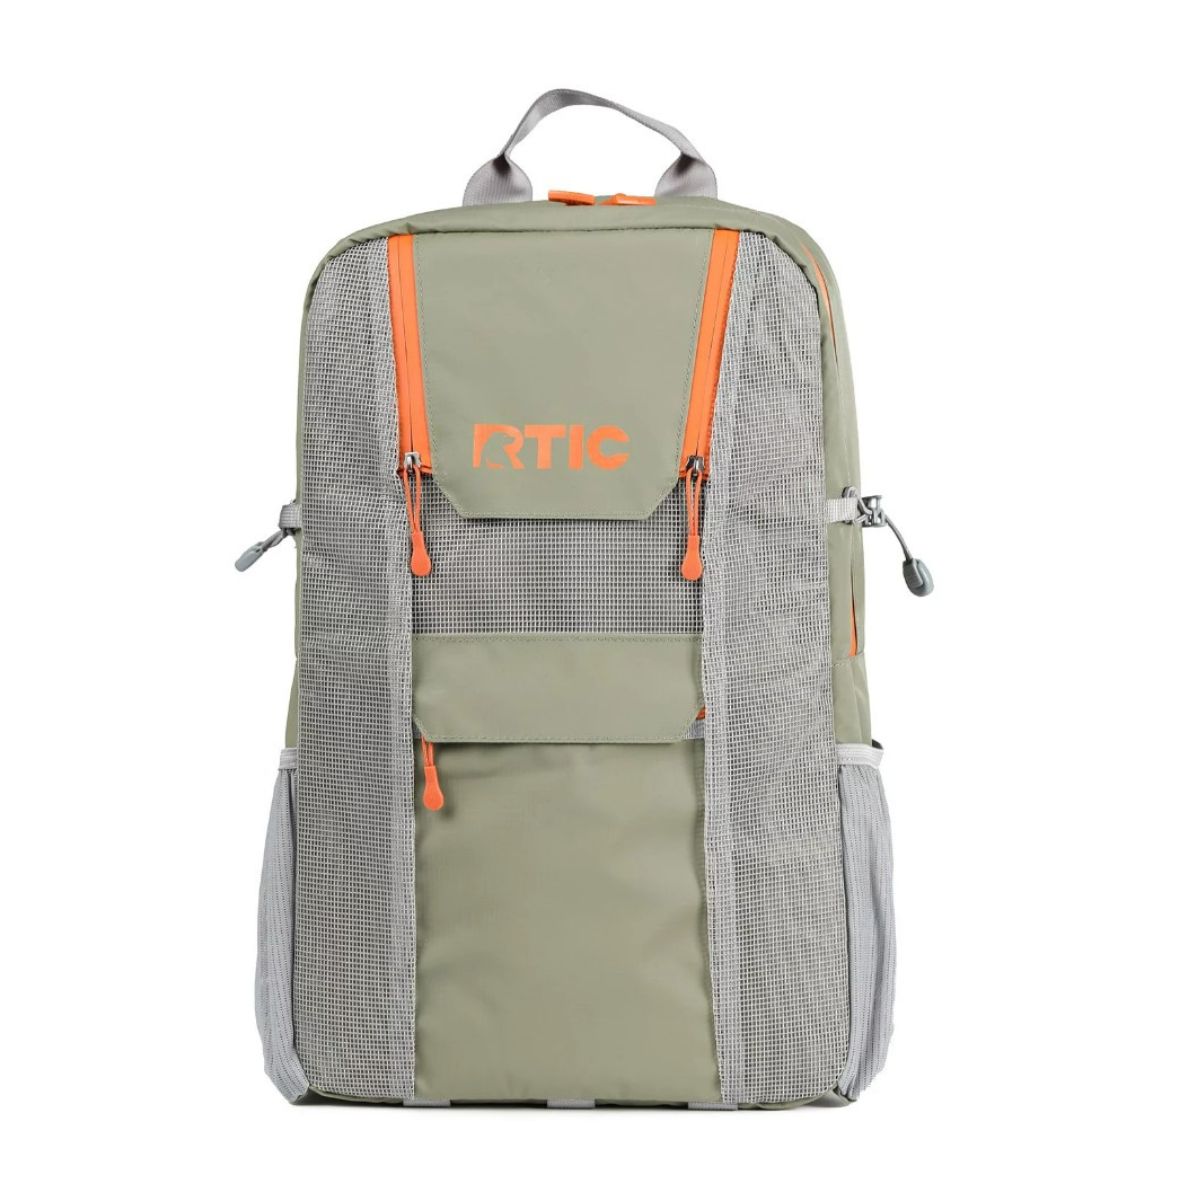 Outdoorsy backpack lunch box - kakhi color with grey and orange trim.